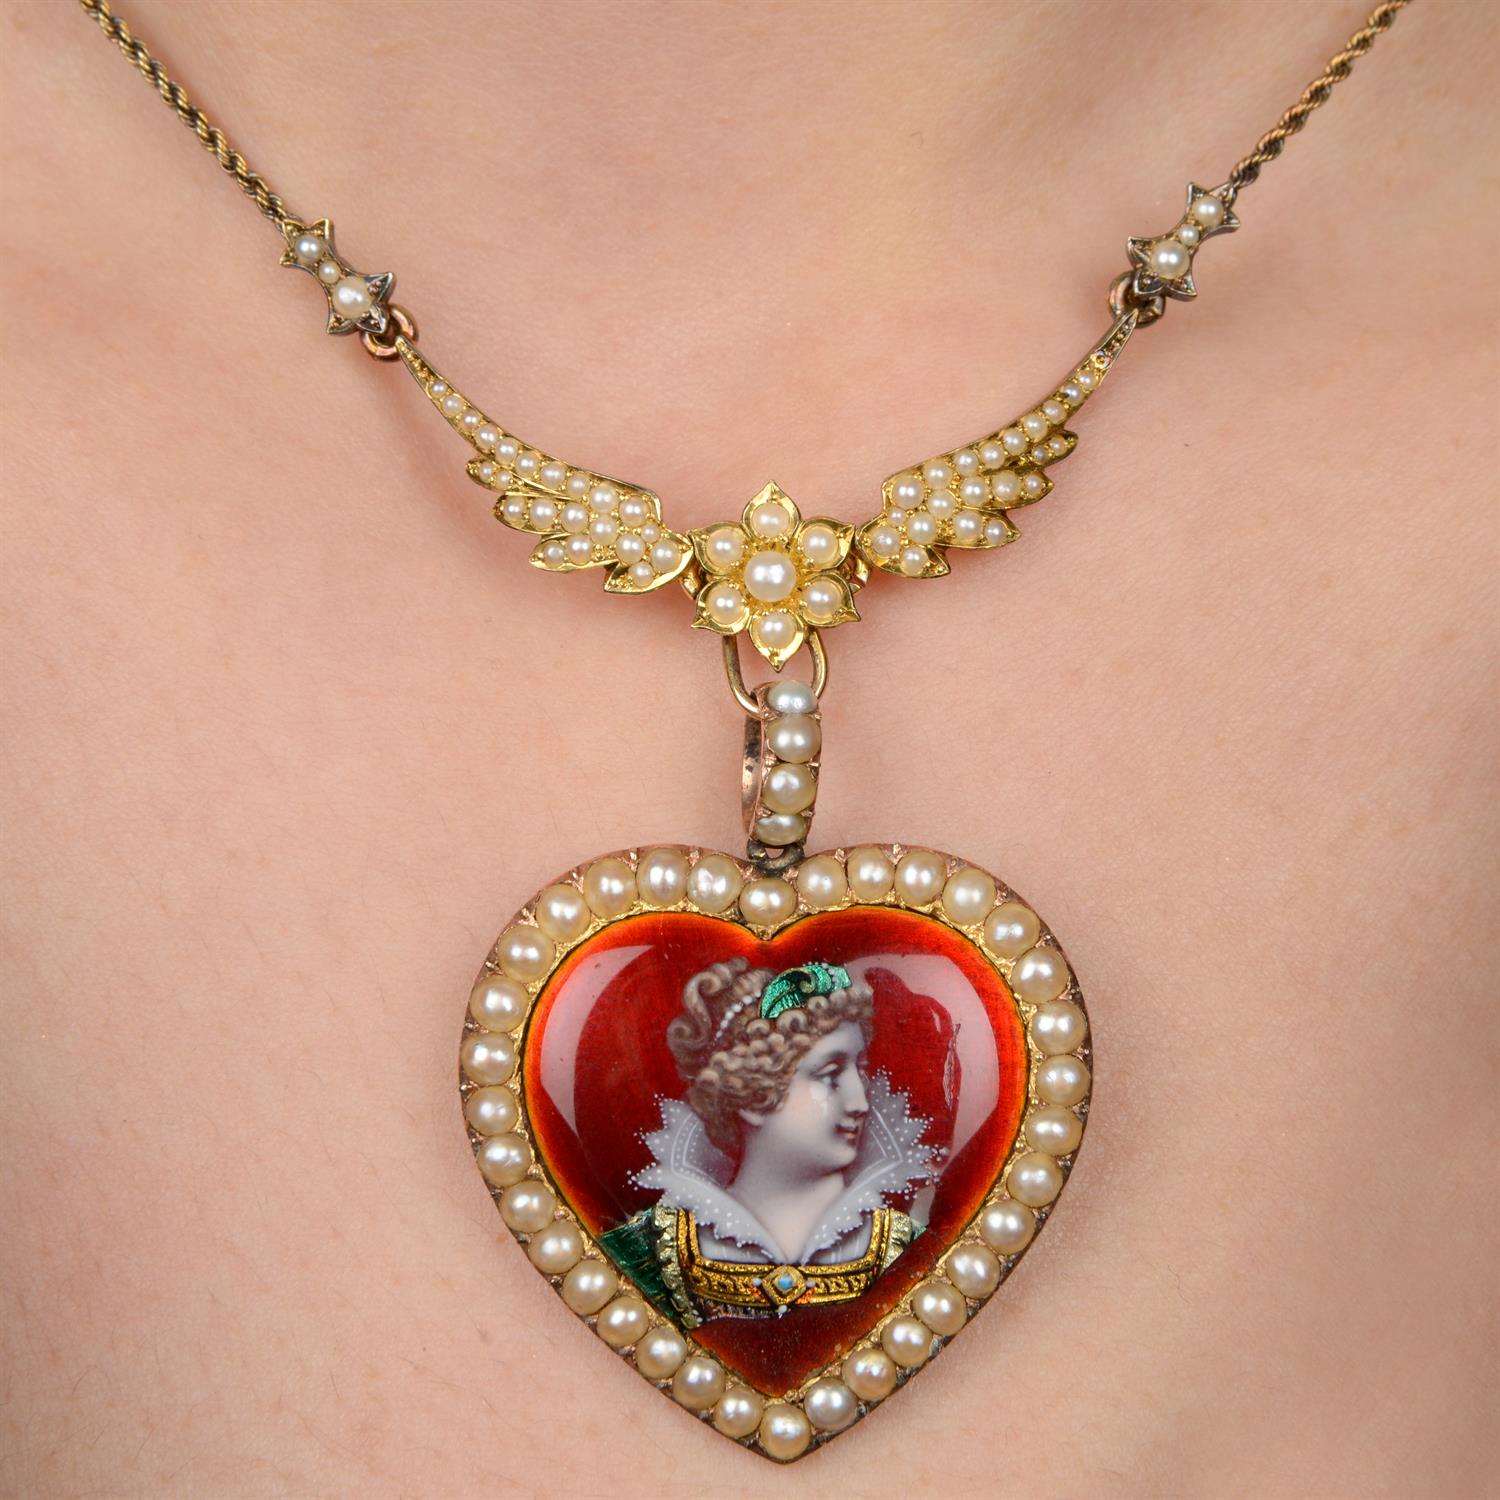 Late 19th century gold enamel heart and wings necklace - Image 5 of 5